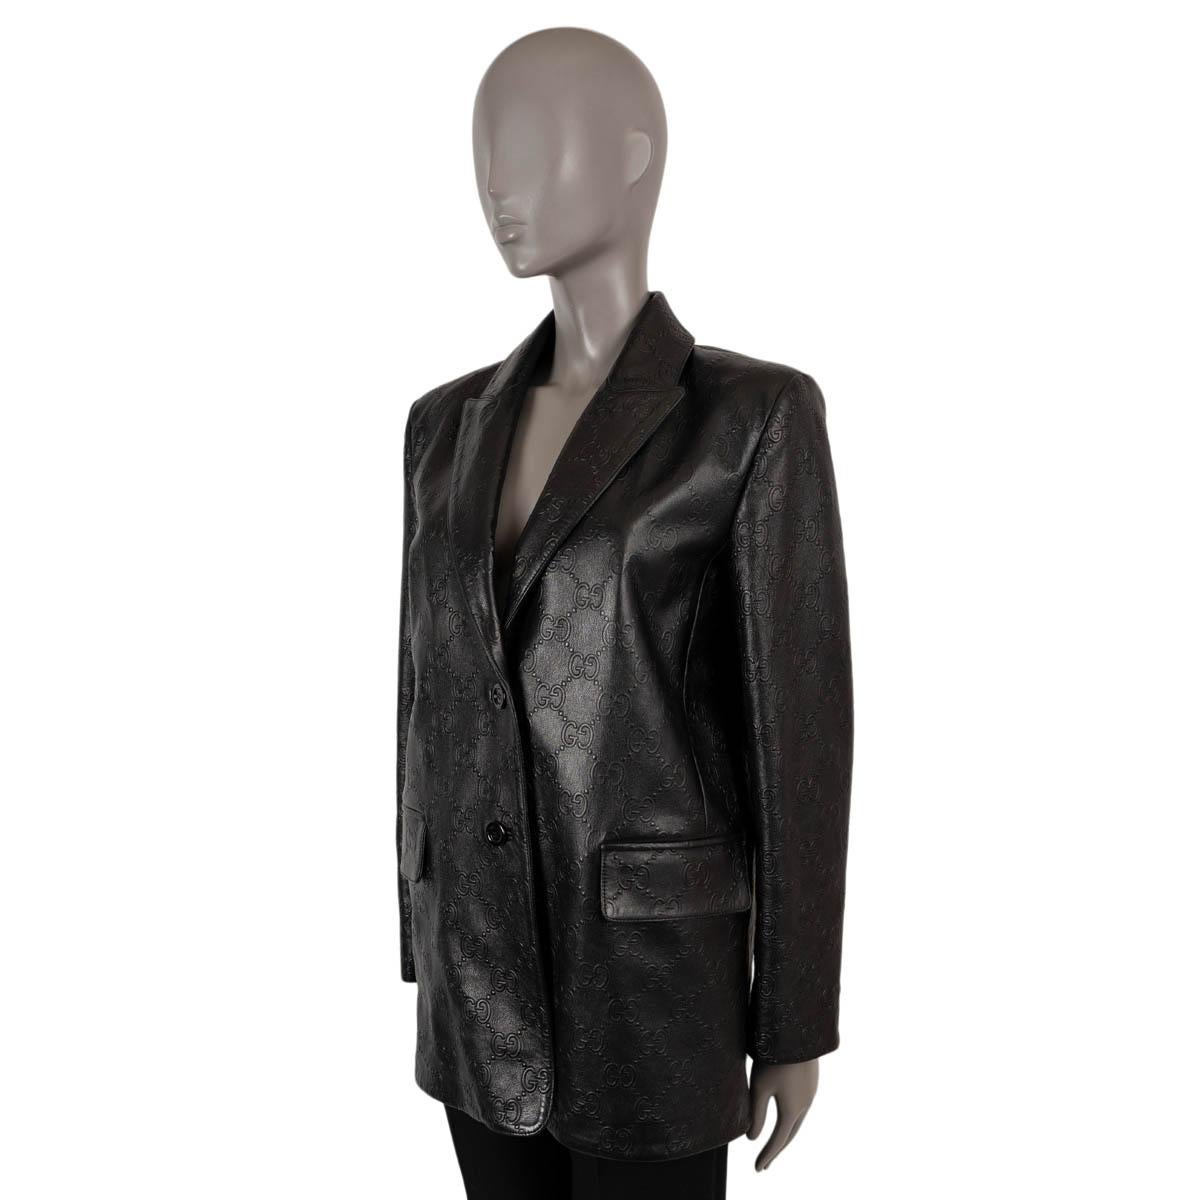 100% authentic Gucci blazer in black clafskin leather (100%) with GG embossing. Features notched lapels and two flap pockets at the waist. Closes with black metal buttons and is lined in viscose (57%) and polyester (43%). Has been worn and is in